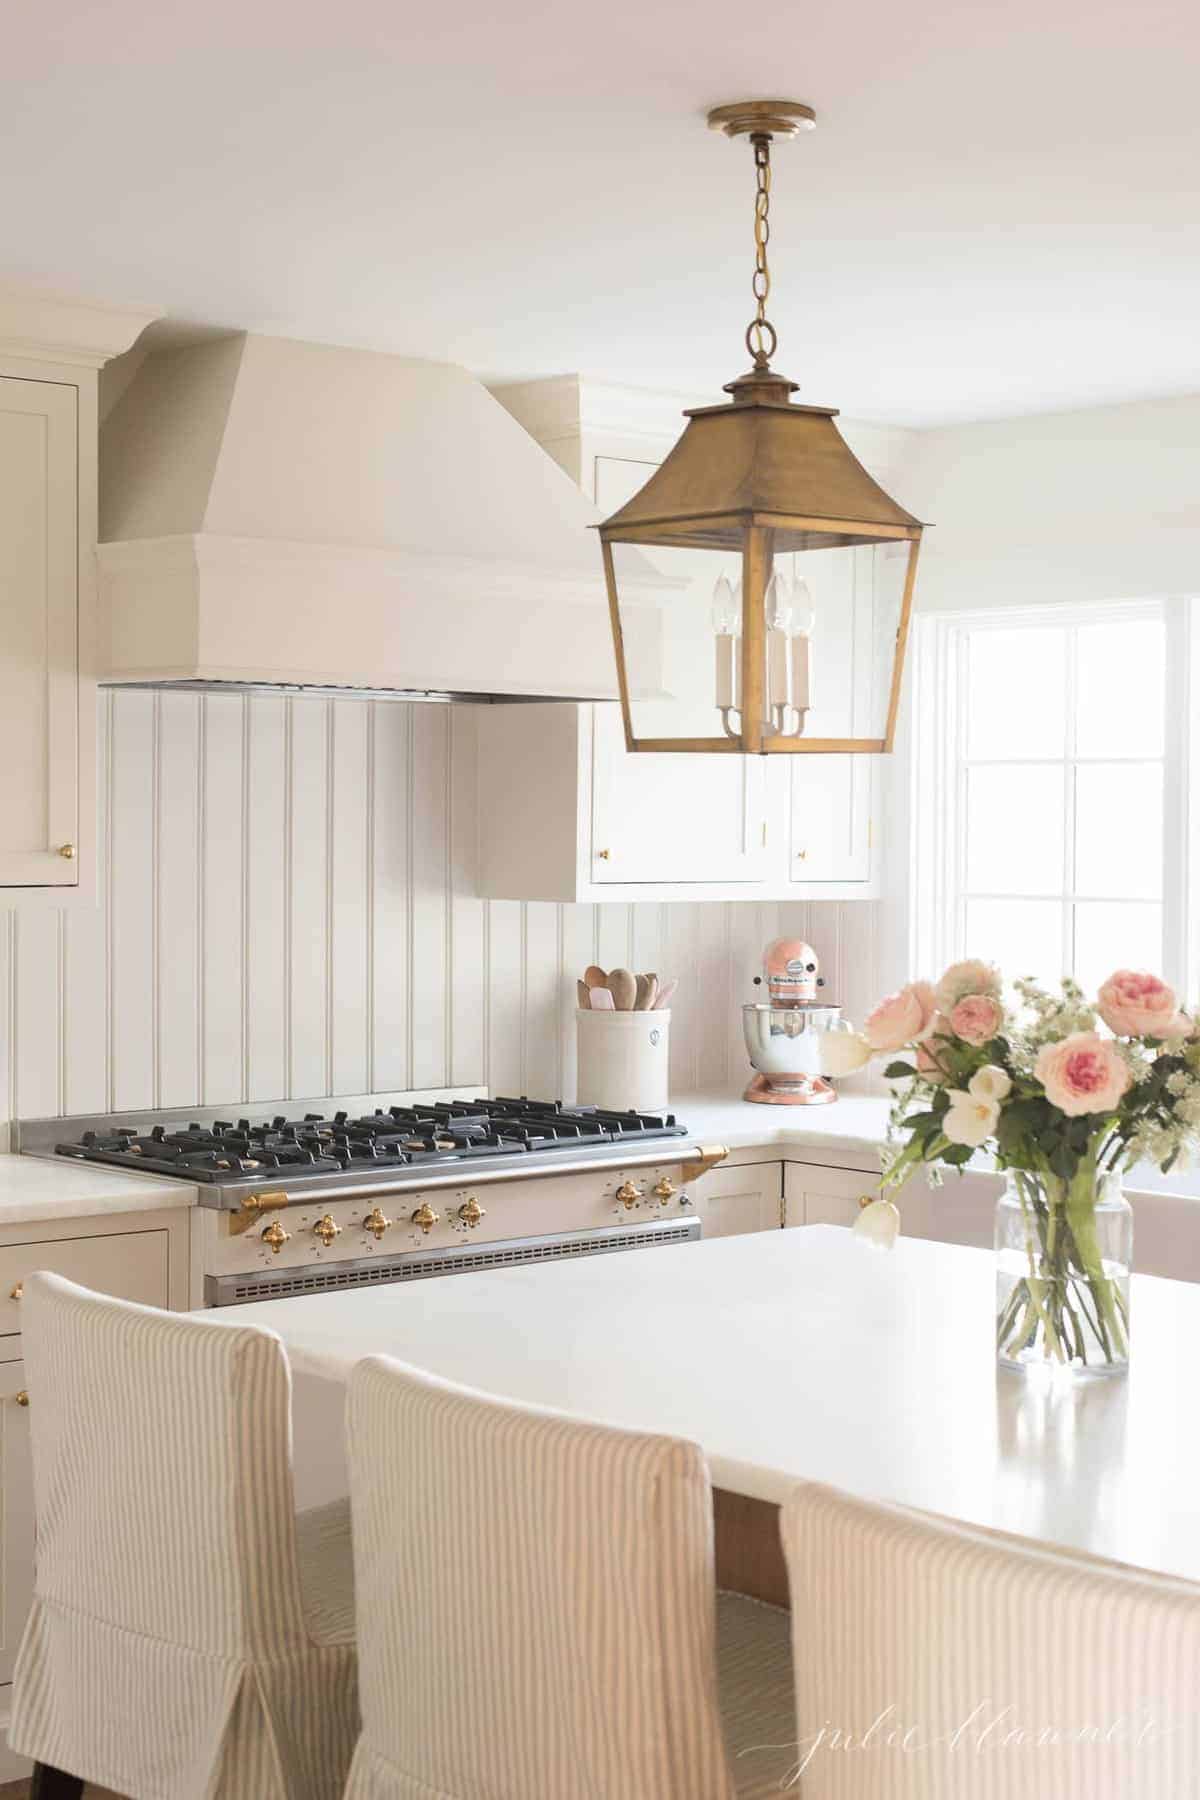 A cream kitchen with a french range and inset cabinets.